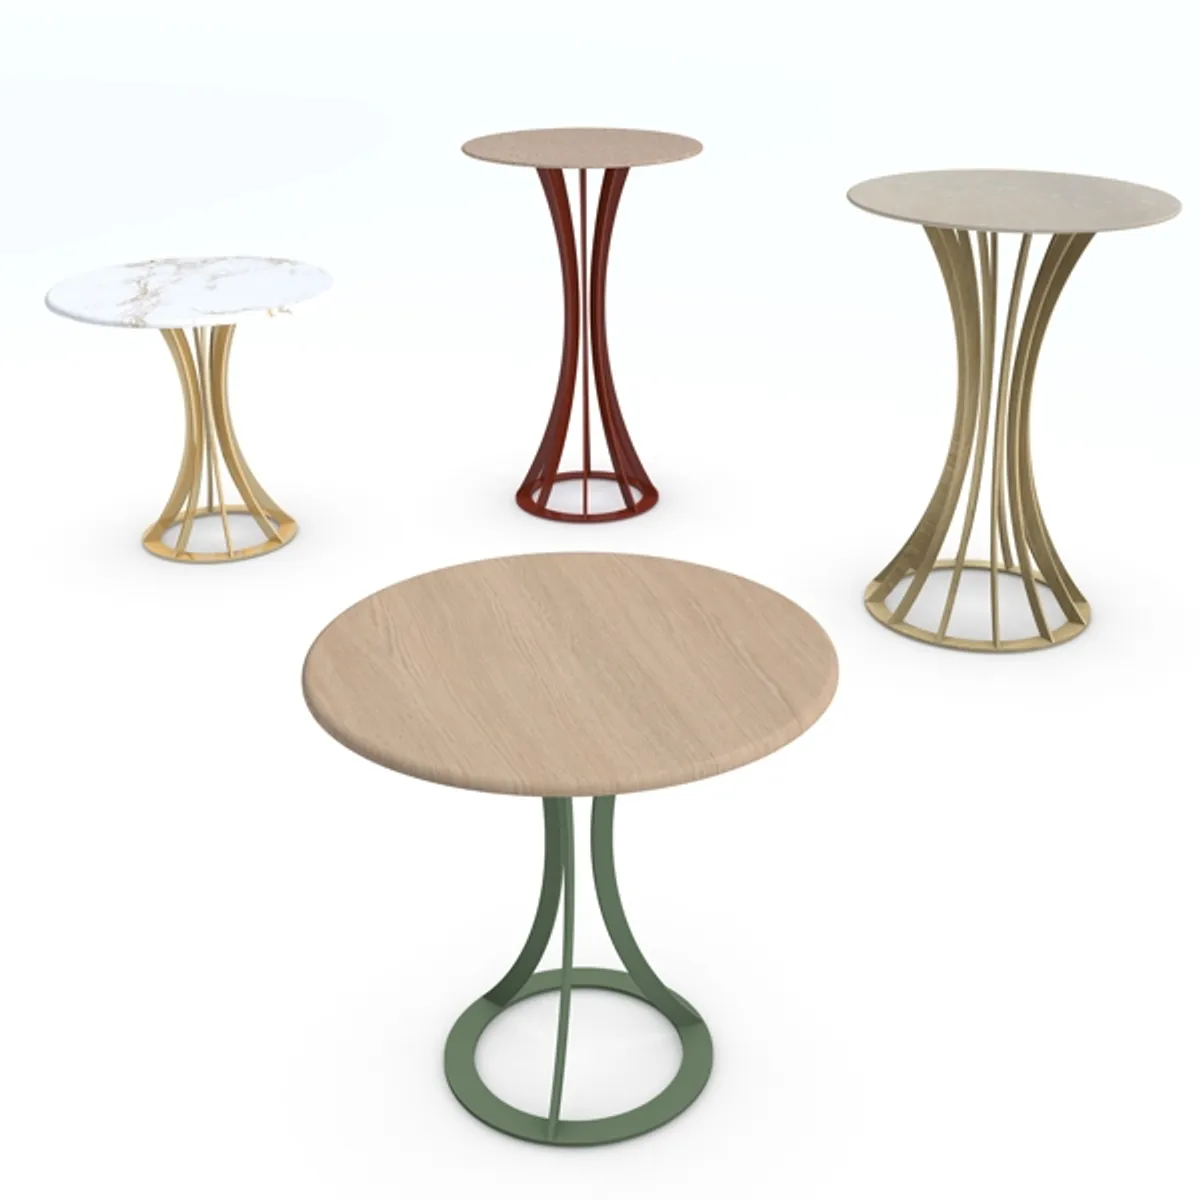 Blondelle table Inside Out Contracts6